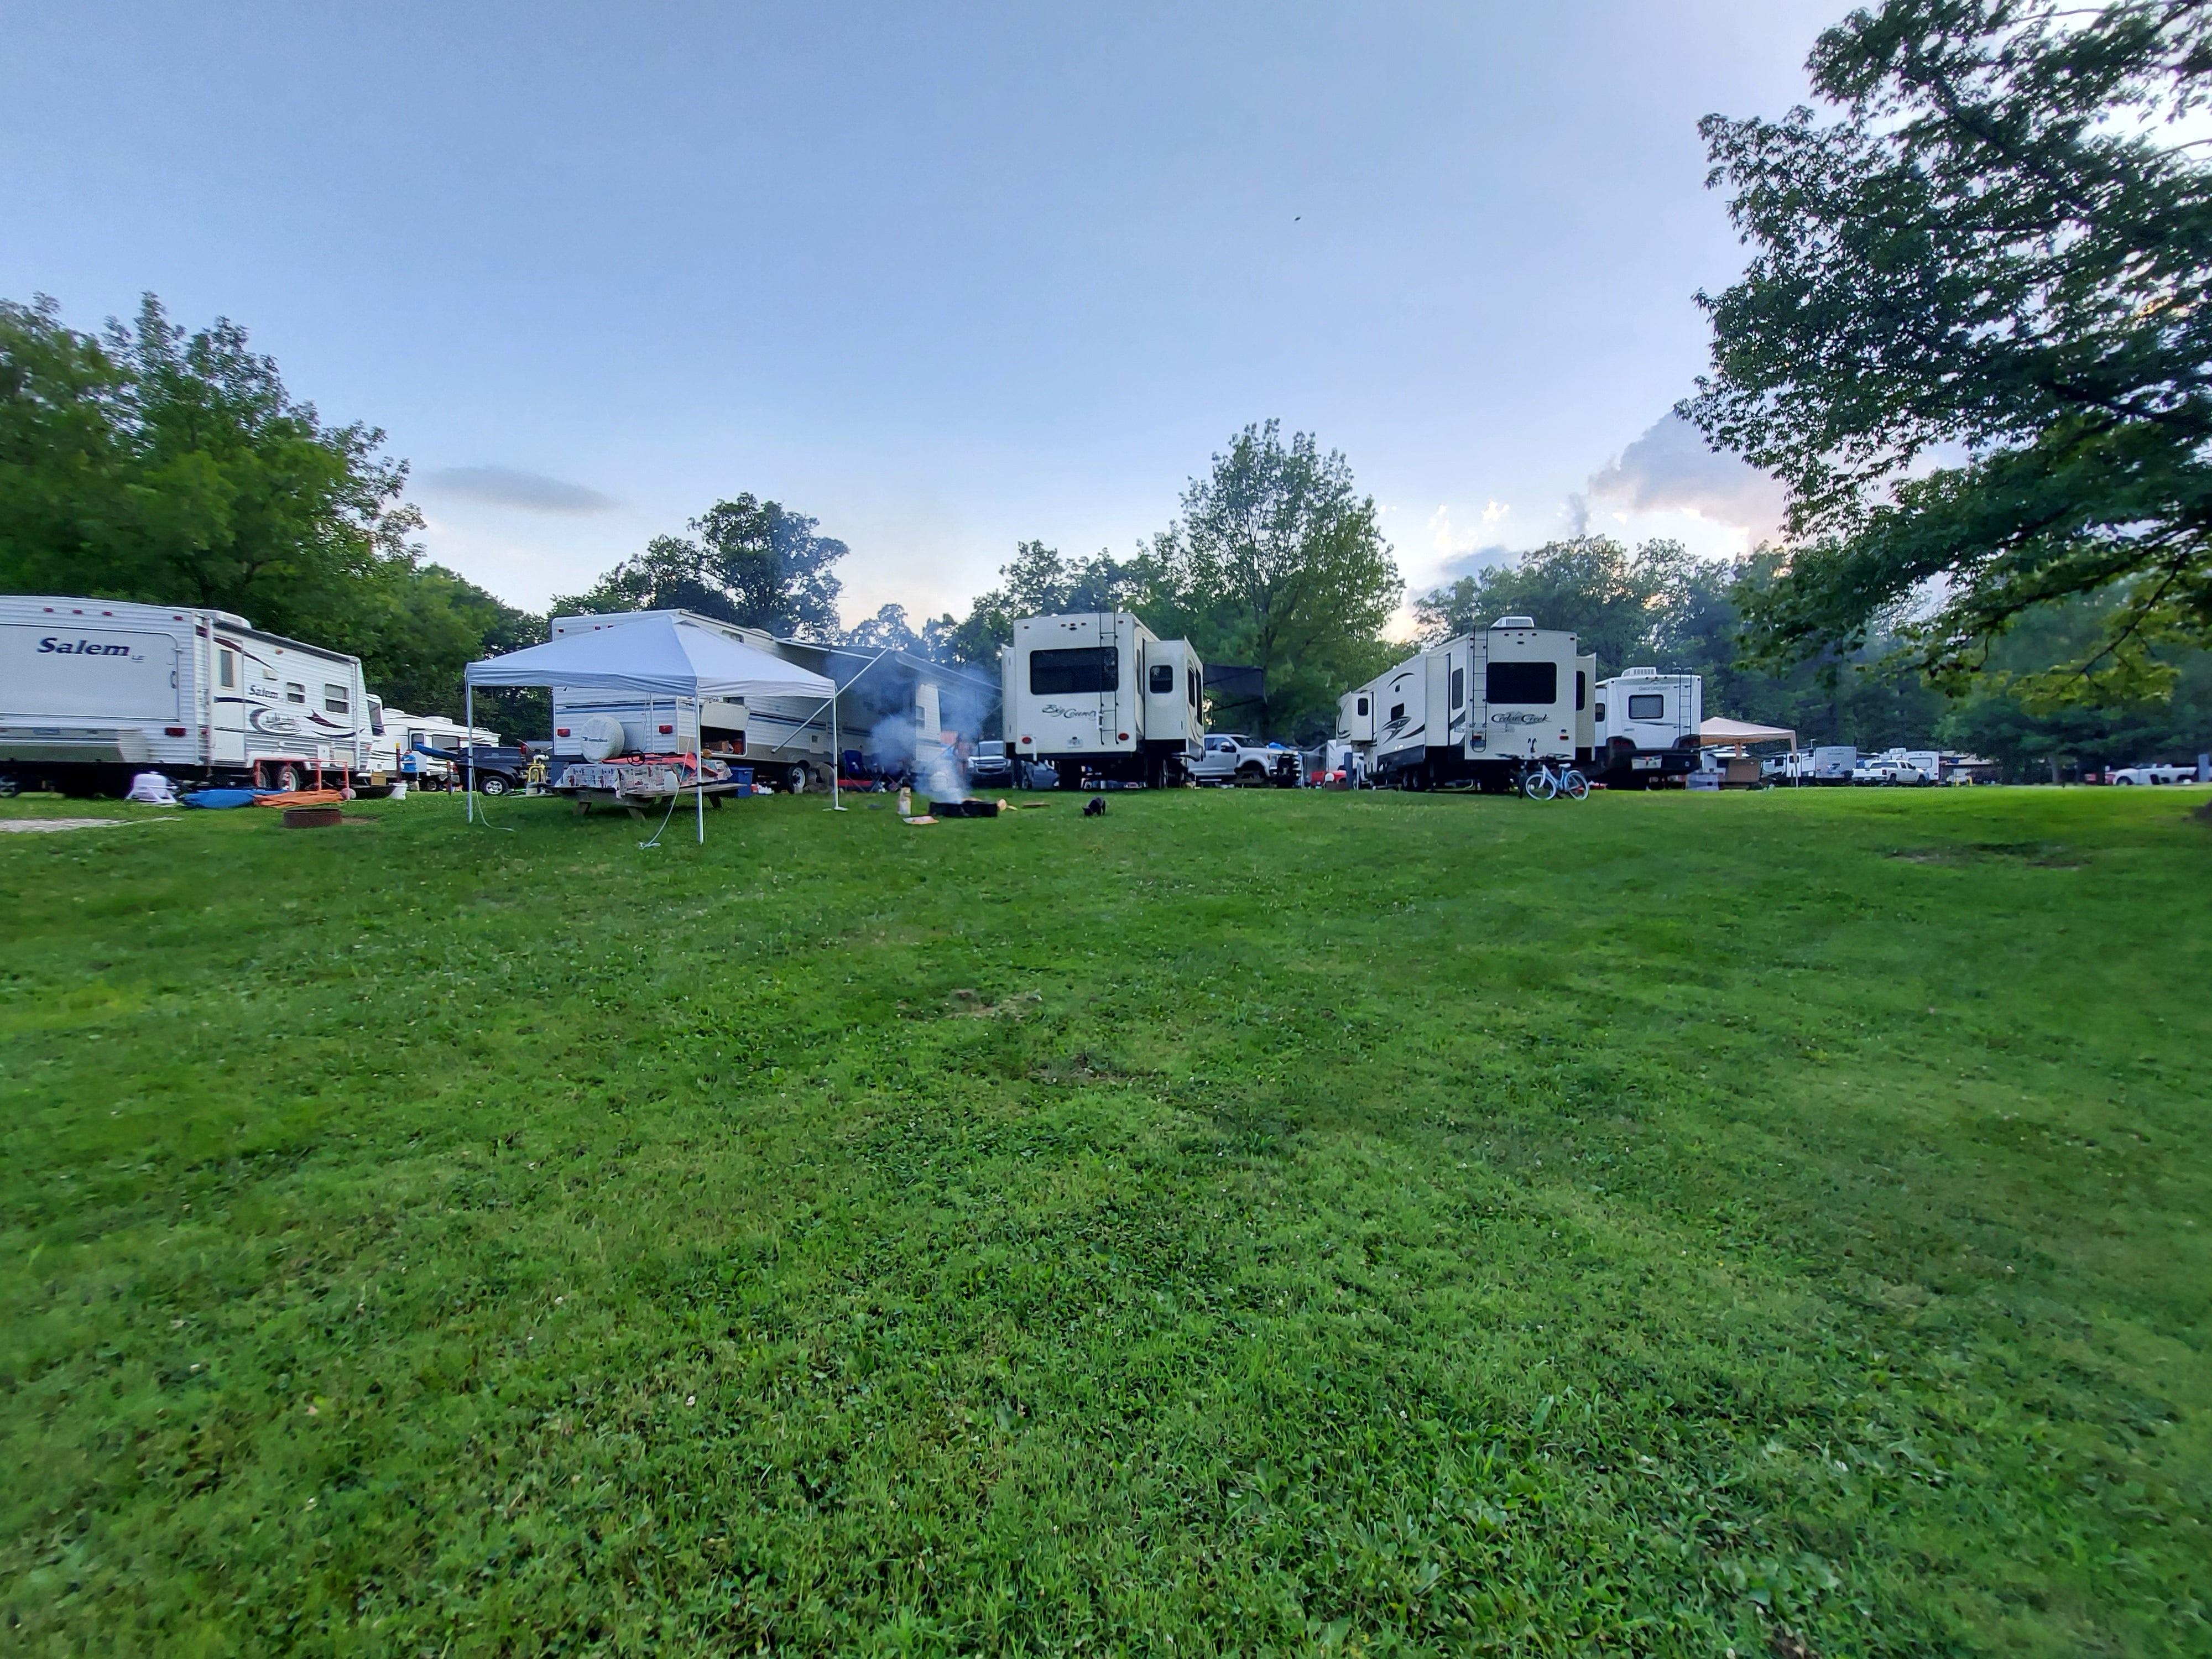 4 campers, less than 25 ft apart.